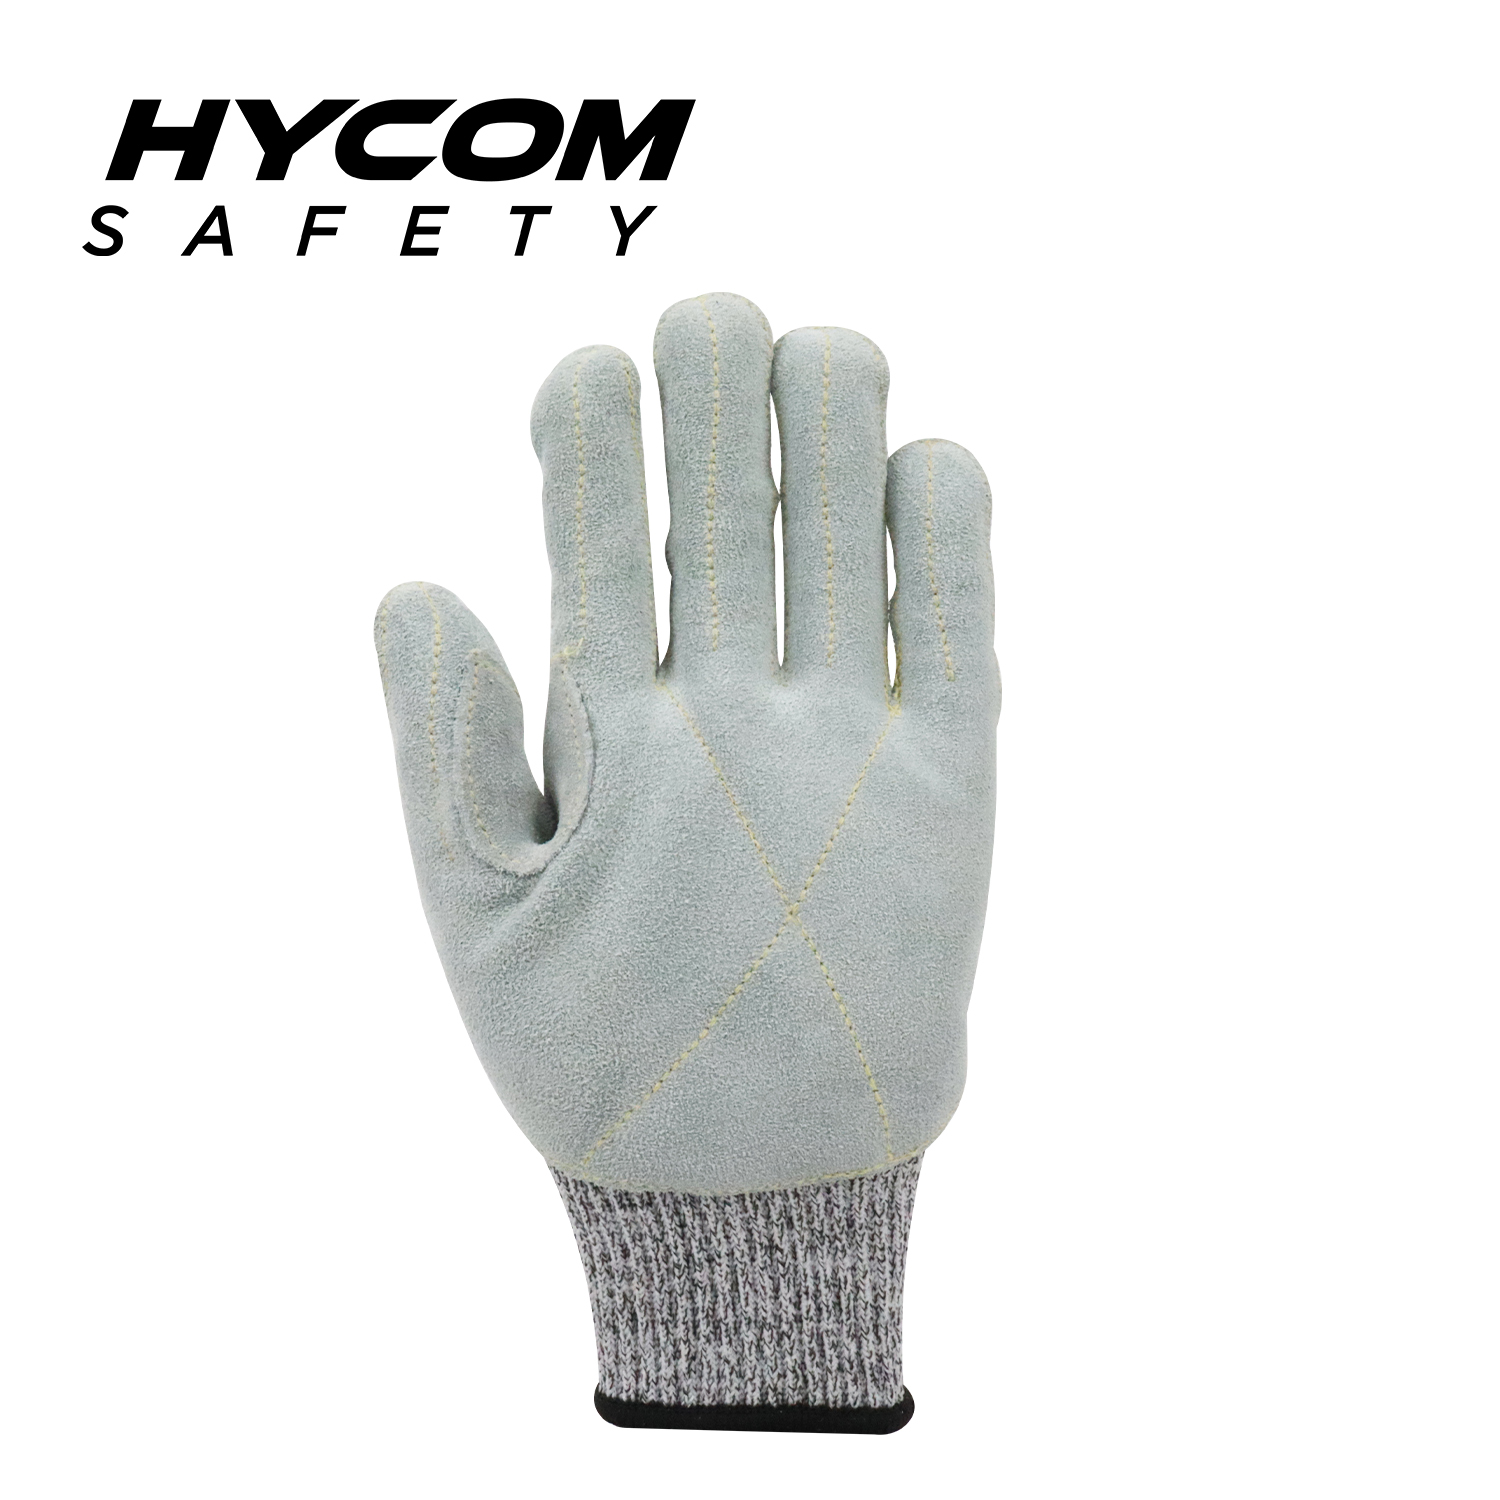 HYCOM 10G ANSI 4 cut resistant glove with palm cow leather